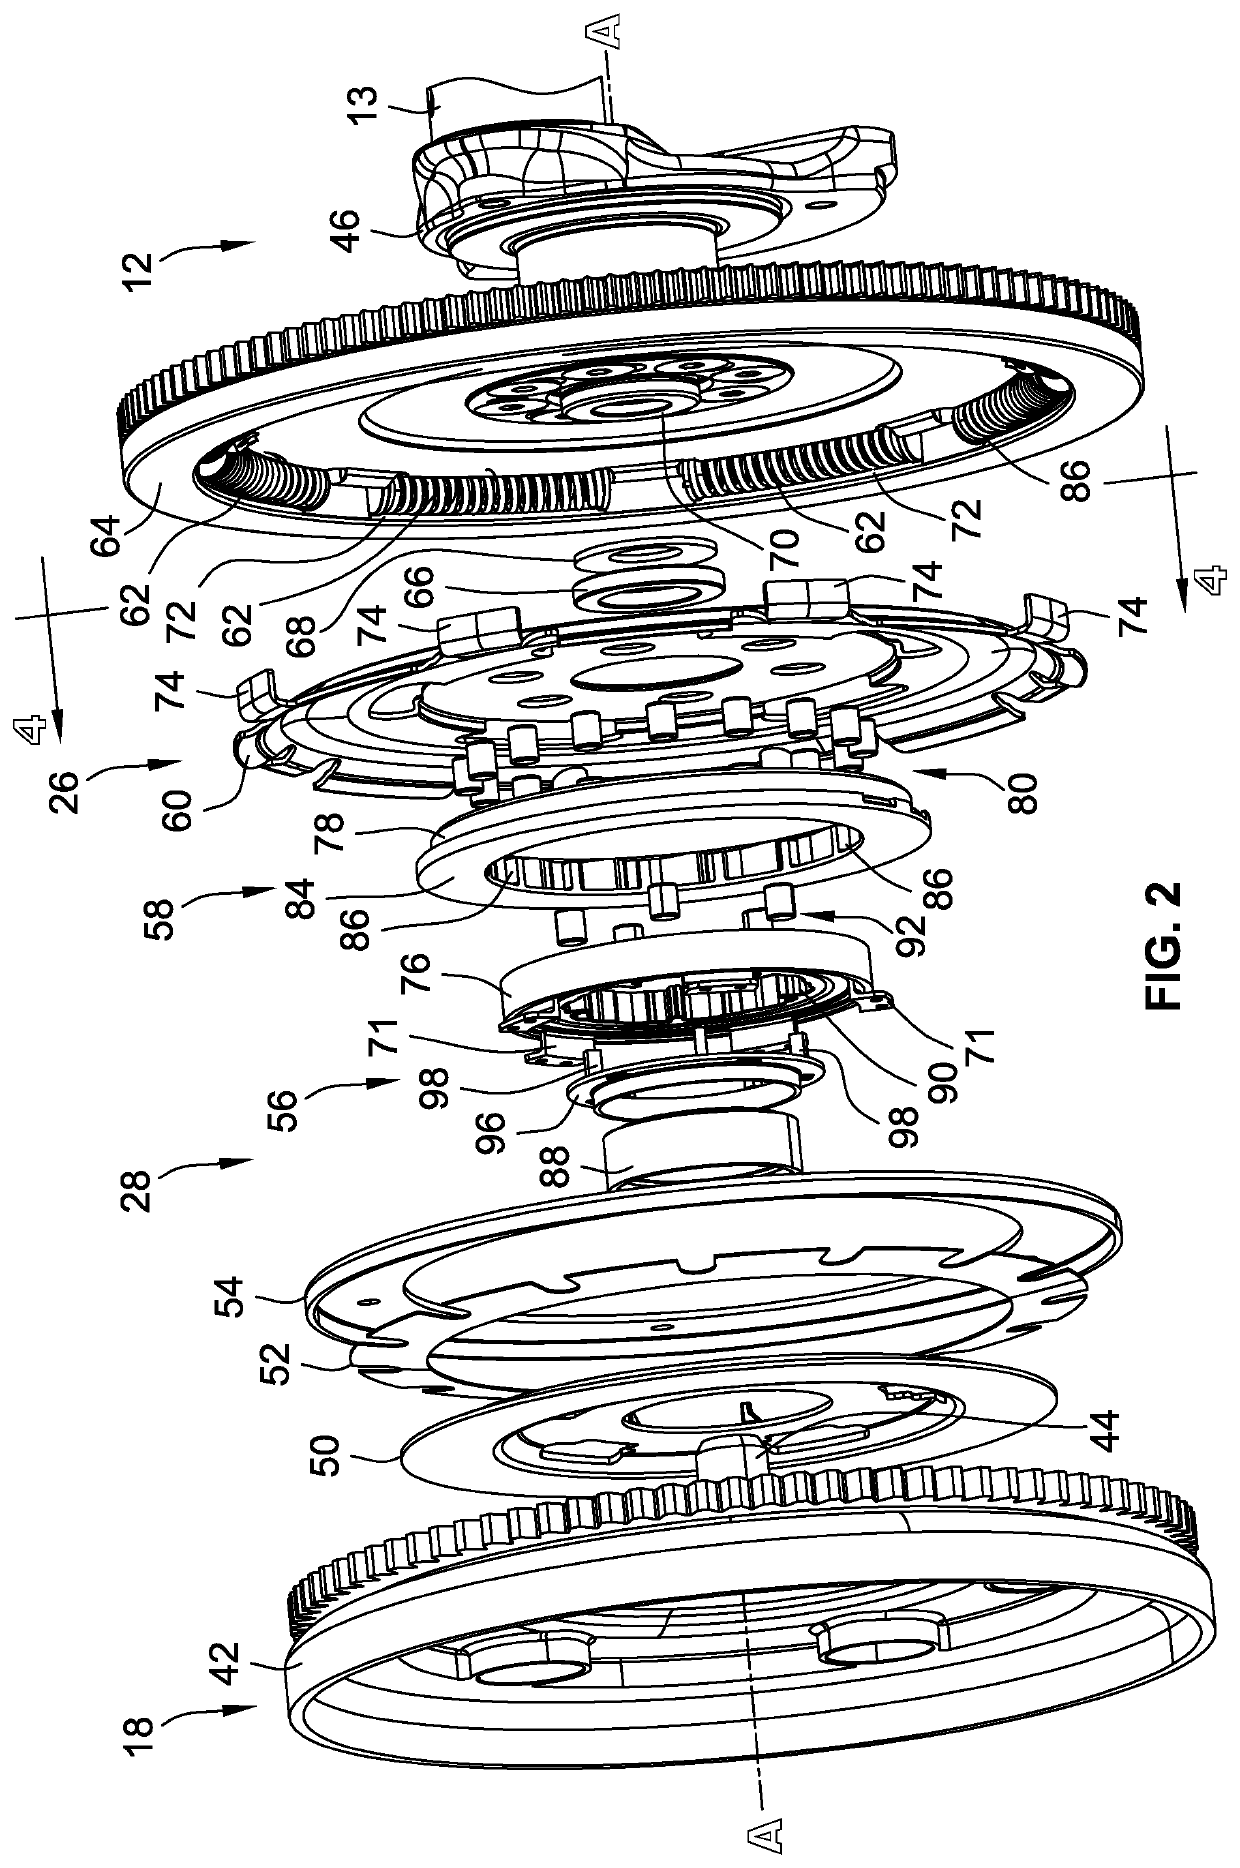 Wedge-type selectable one-way clutches for engine disconnect devices of motor vehicle powertrains